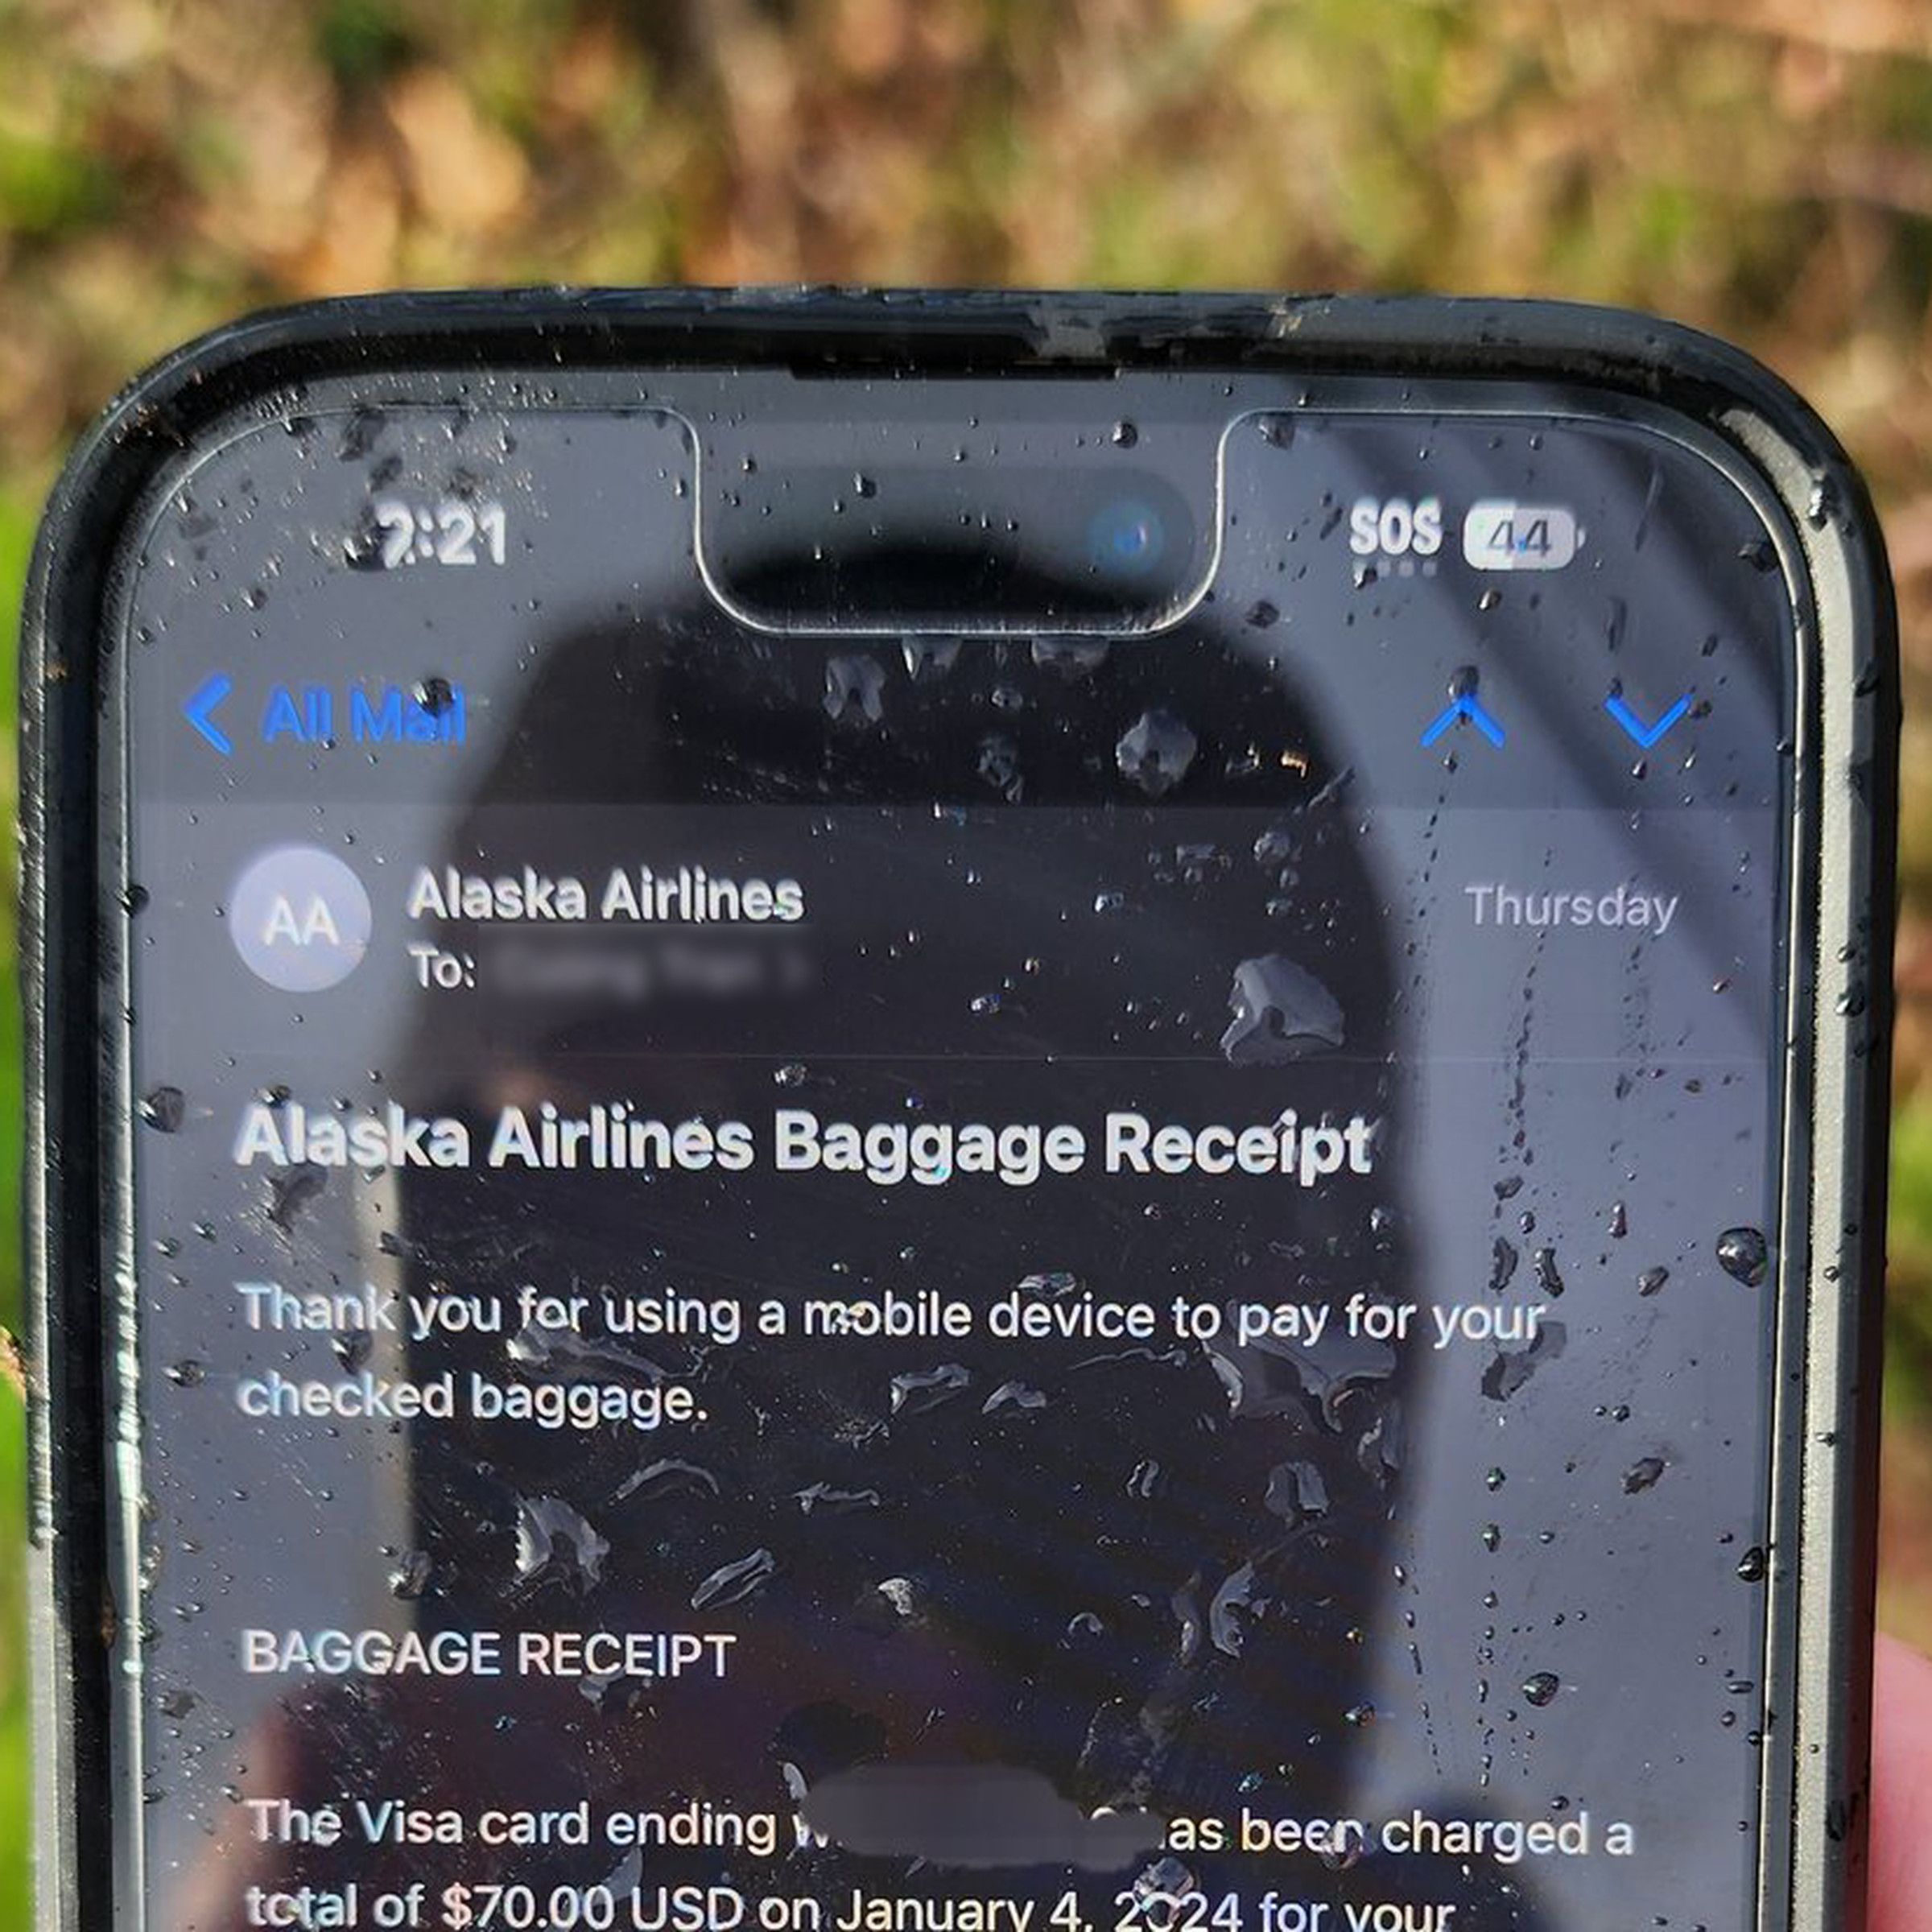 A picture of the top half of an iPhone showing an airline baggage receipt.